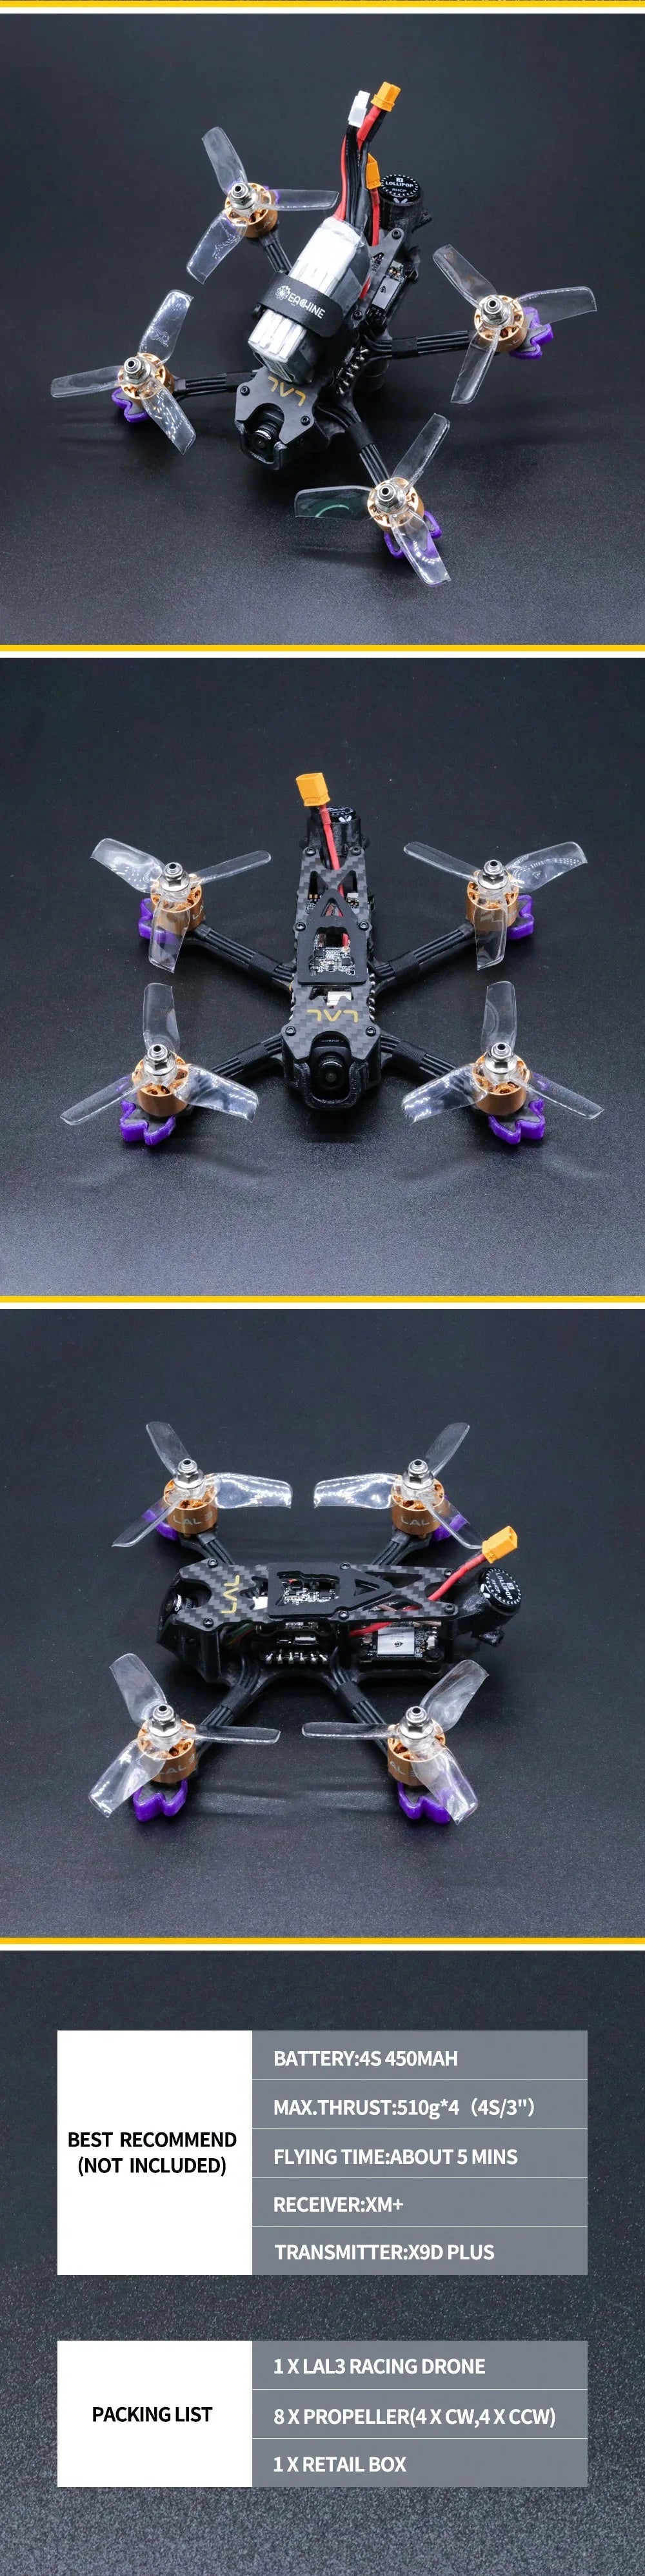 TCMMRC LAL3 FPV Racing Drone, FLYING TIME:ABOUT 5 MINS RECEIVER:XM+